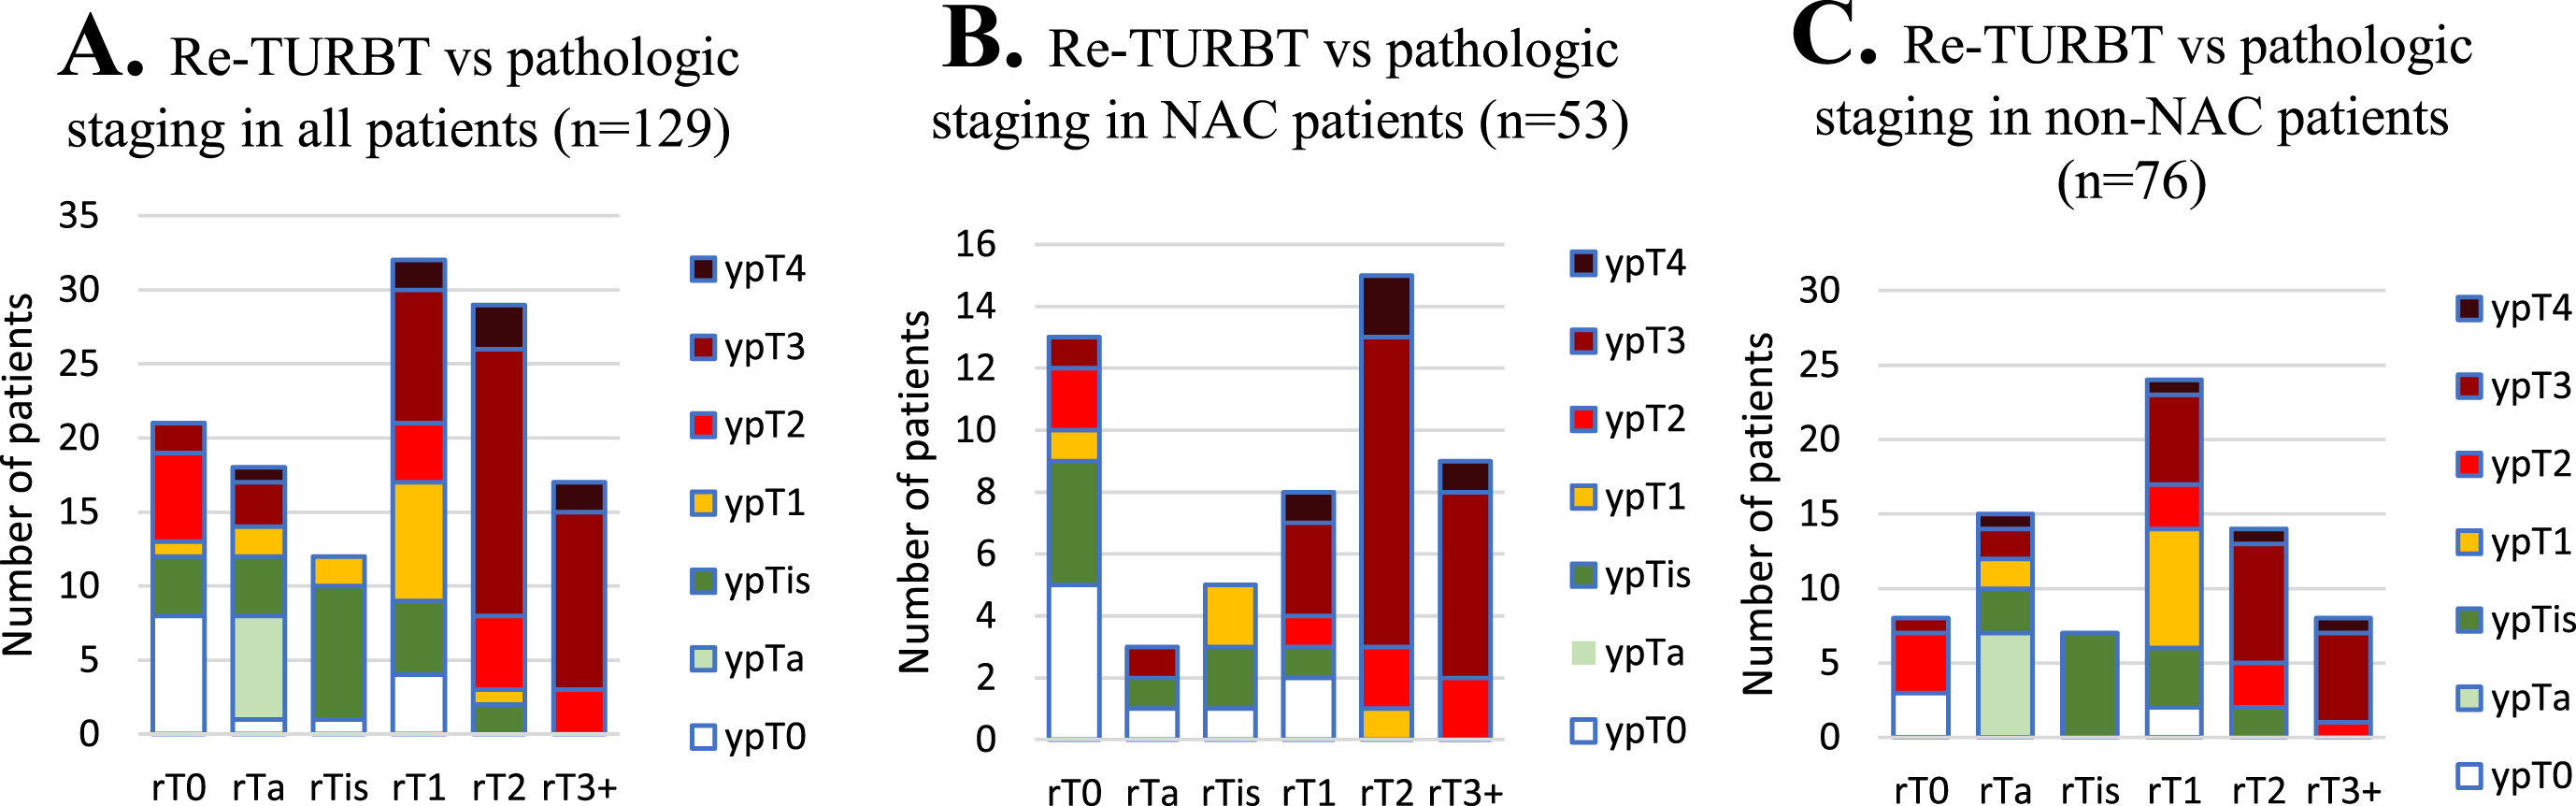 Distribution of final re-TURBT stage (rT) vs final pathologic stage (ypT). (A) all patients undergoing re-TURBT prior to RC; (B) patients treated with NAC prior to RC; (C) patients who were not treated with NAC prior to RC. TURBT = transurethral resection of bladder tumor; RC = radical cystectomy; NAC = neoadjuvant chemotherapy.